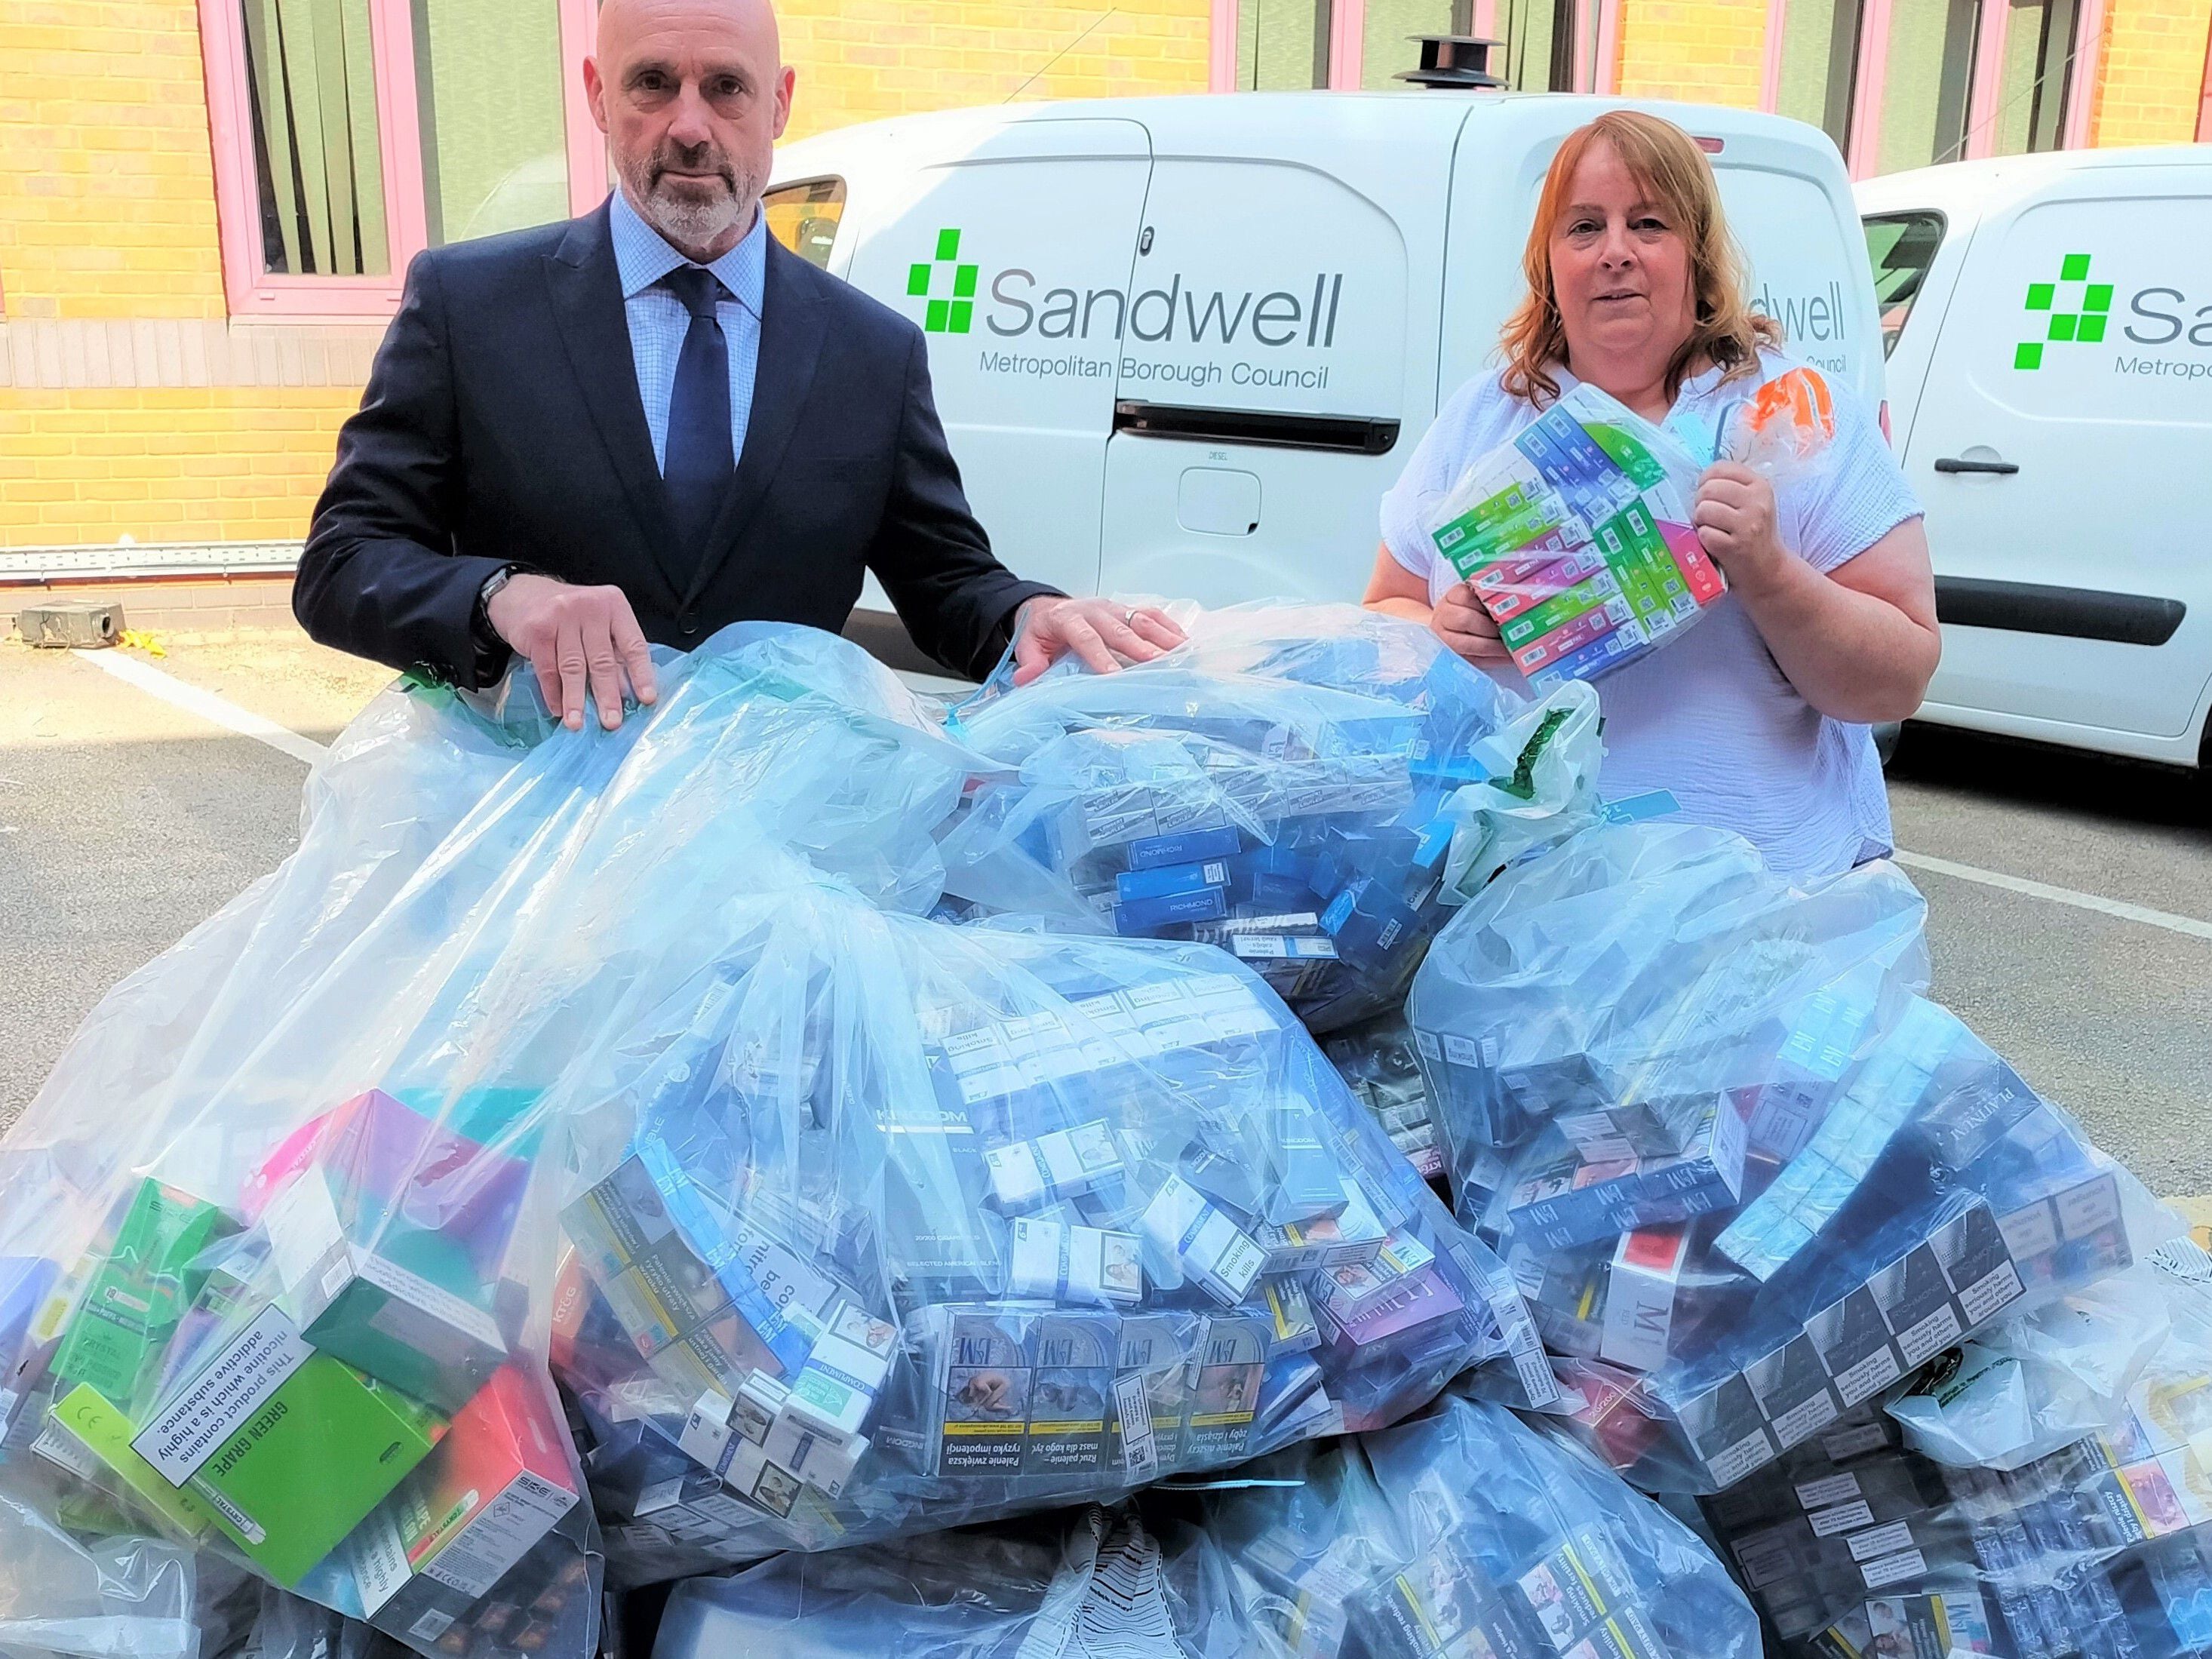 Watch: Dangerous vapes and tobacco worth more than £120,000 seized in Sandwell